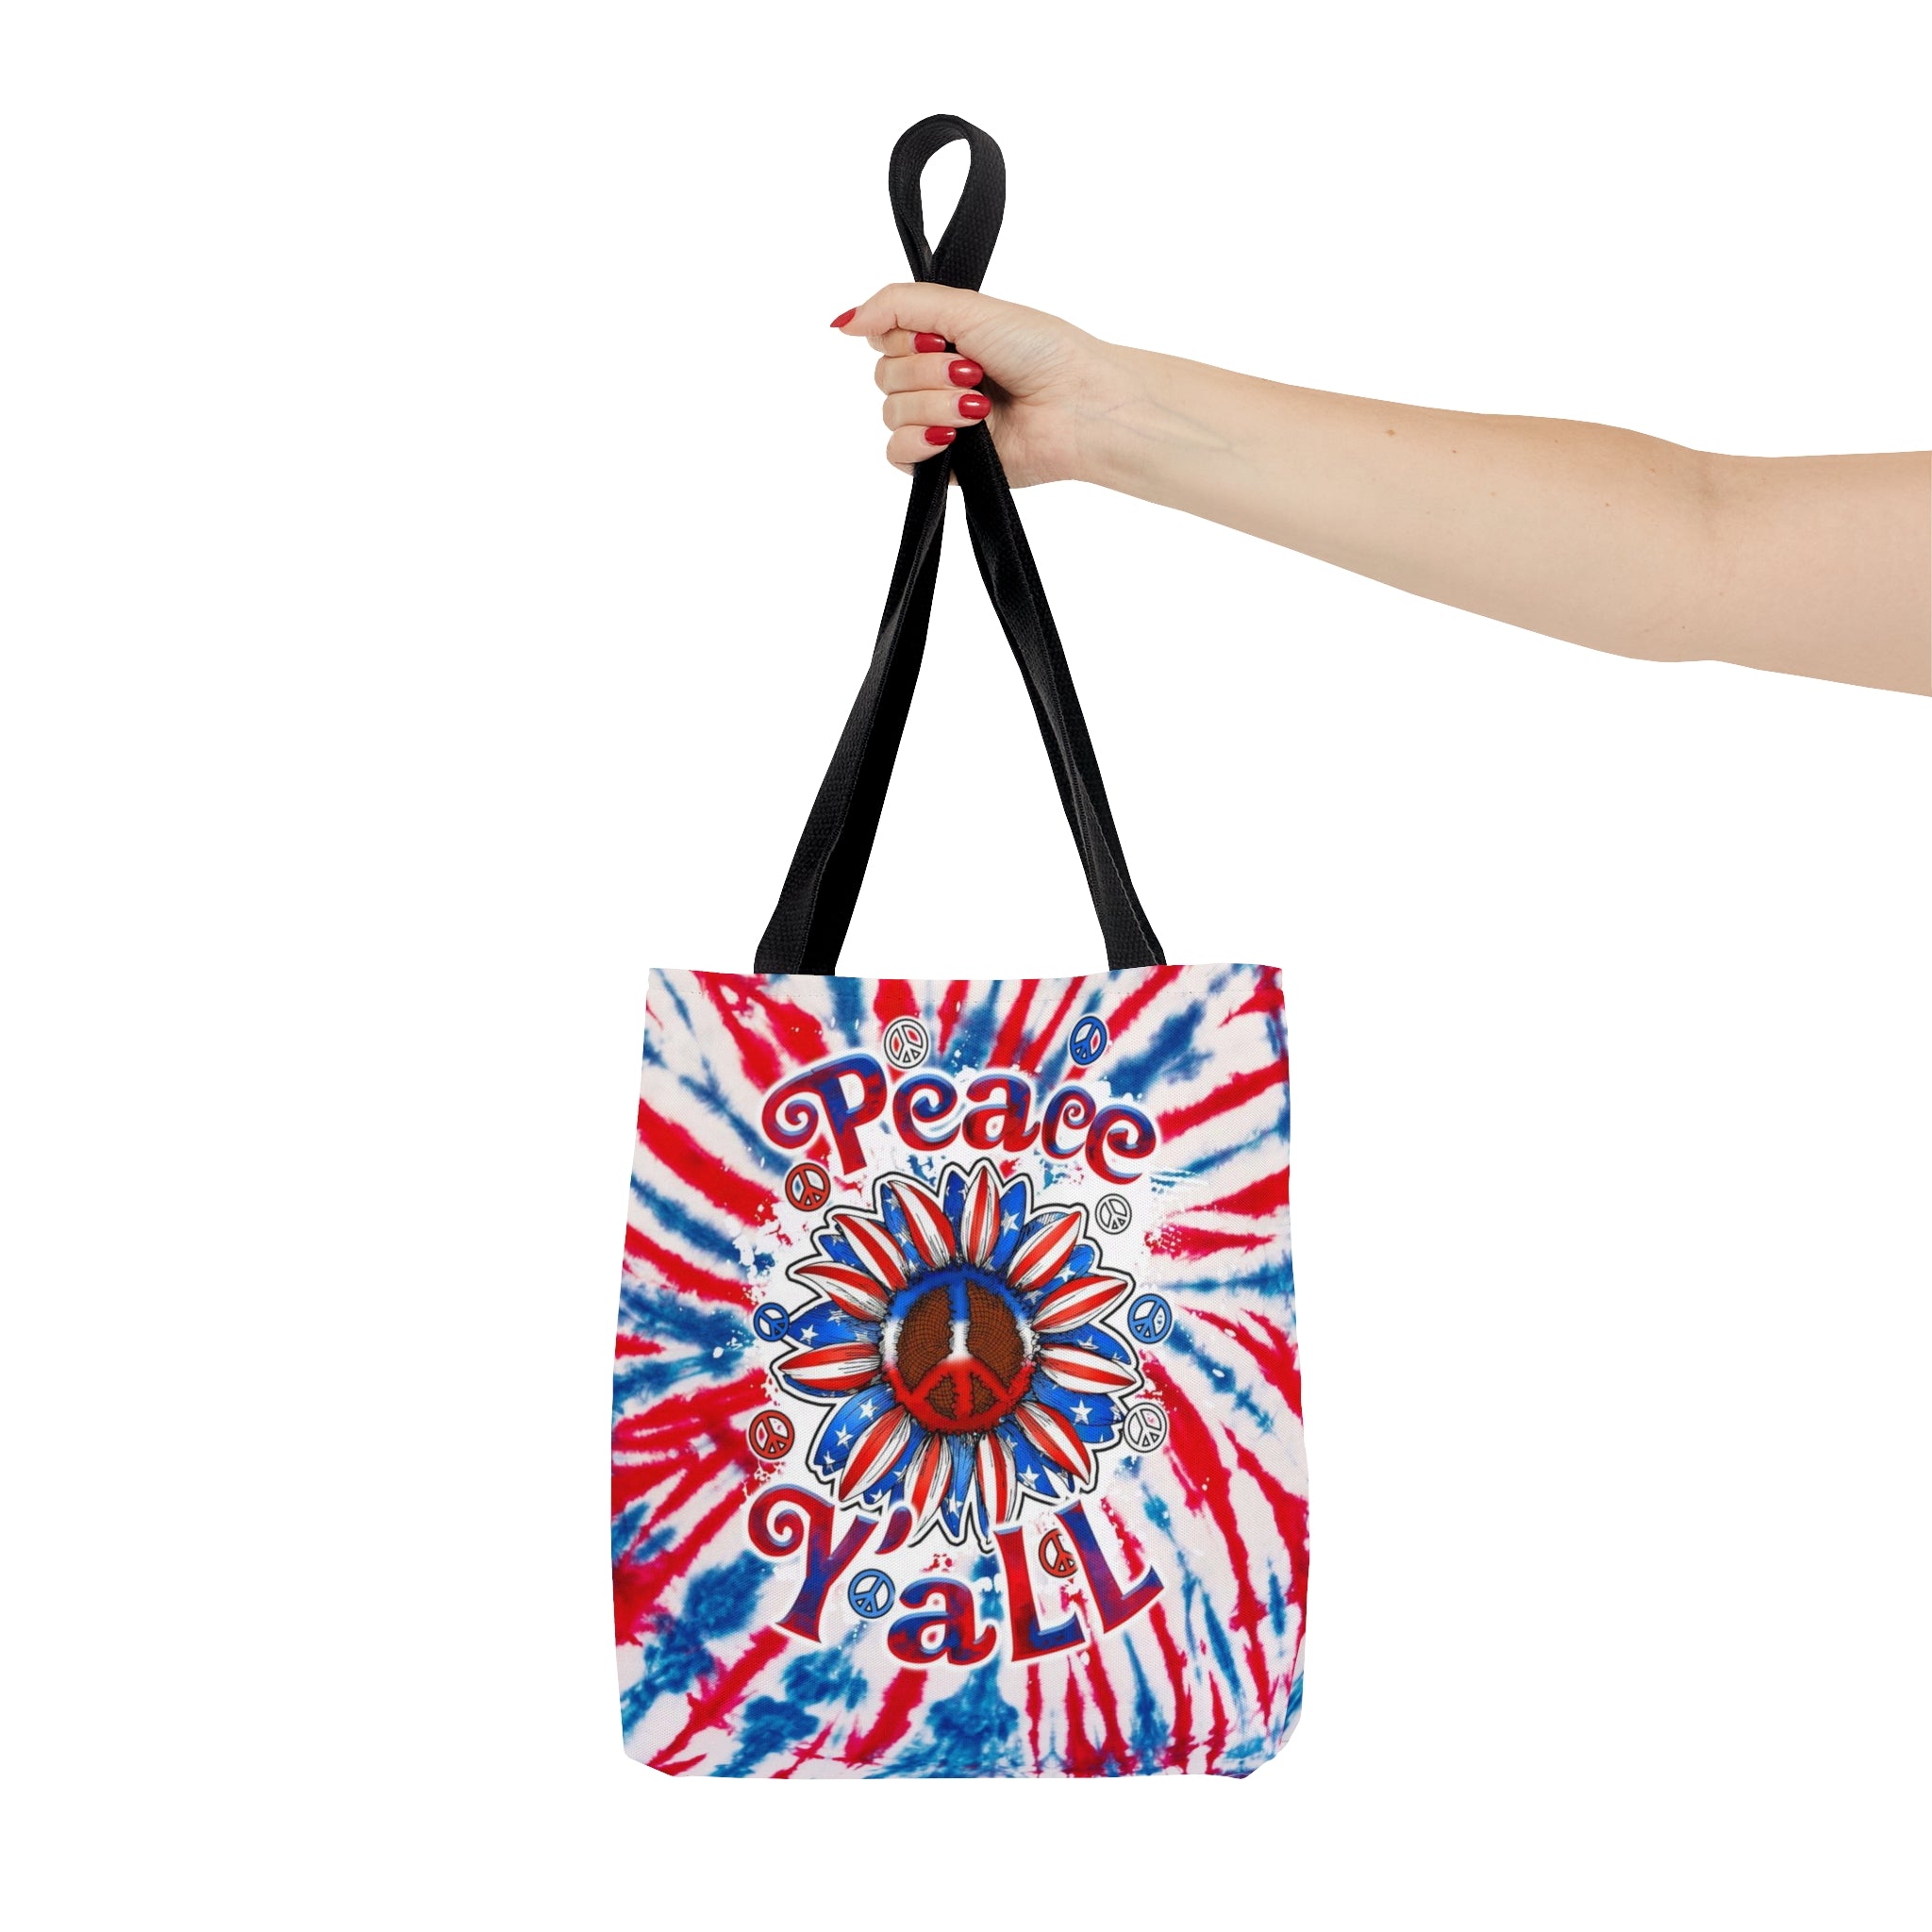 PEACE Y'ALL SUNFLOWER AMERICA TIE DYE TOTE BAG - TLTW2306238